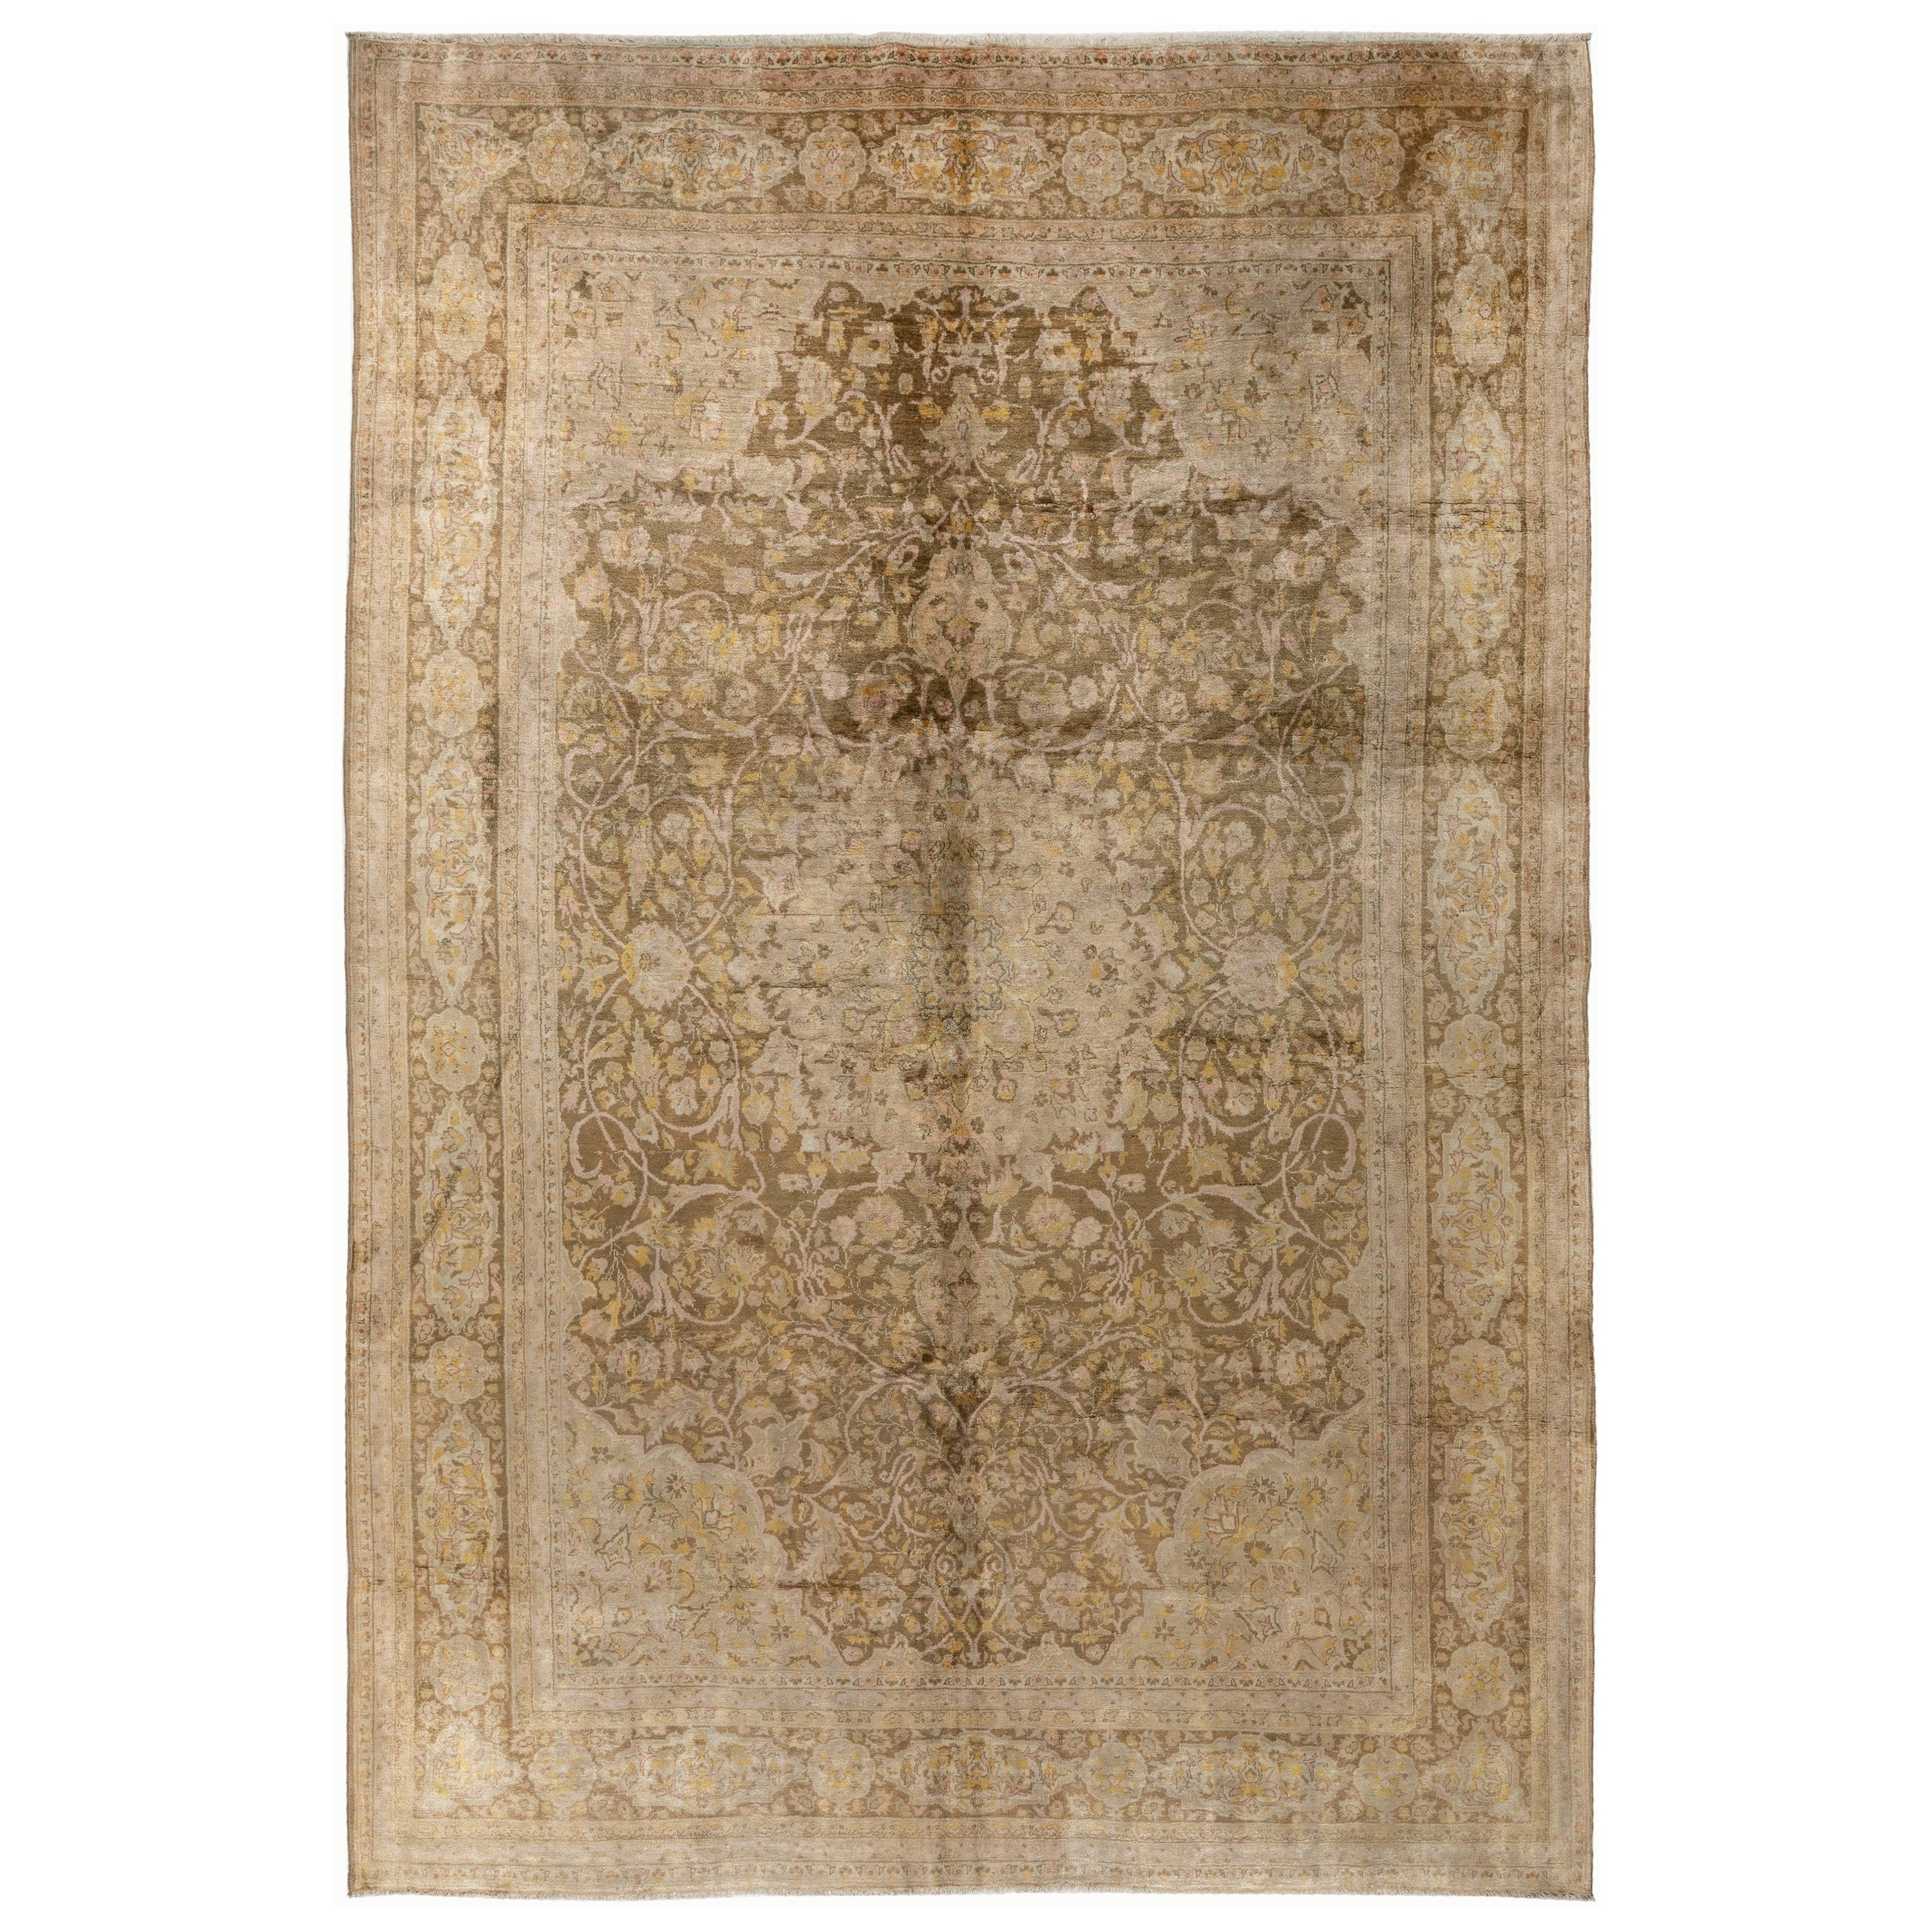 8x10.6 Ft Semi Antique Turkish Sivas Rug in Soft Colors, Velvety Wool Pile For Sale